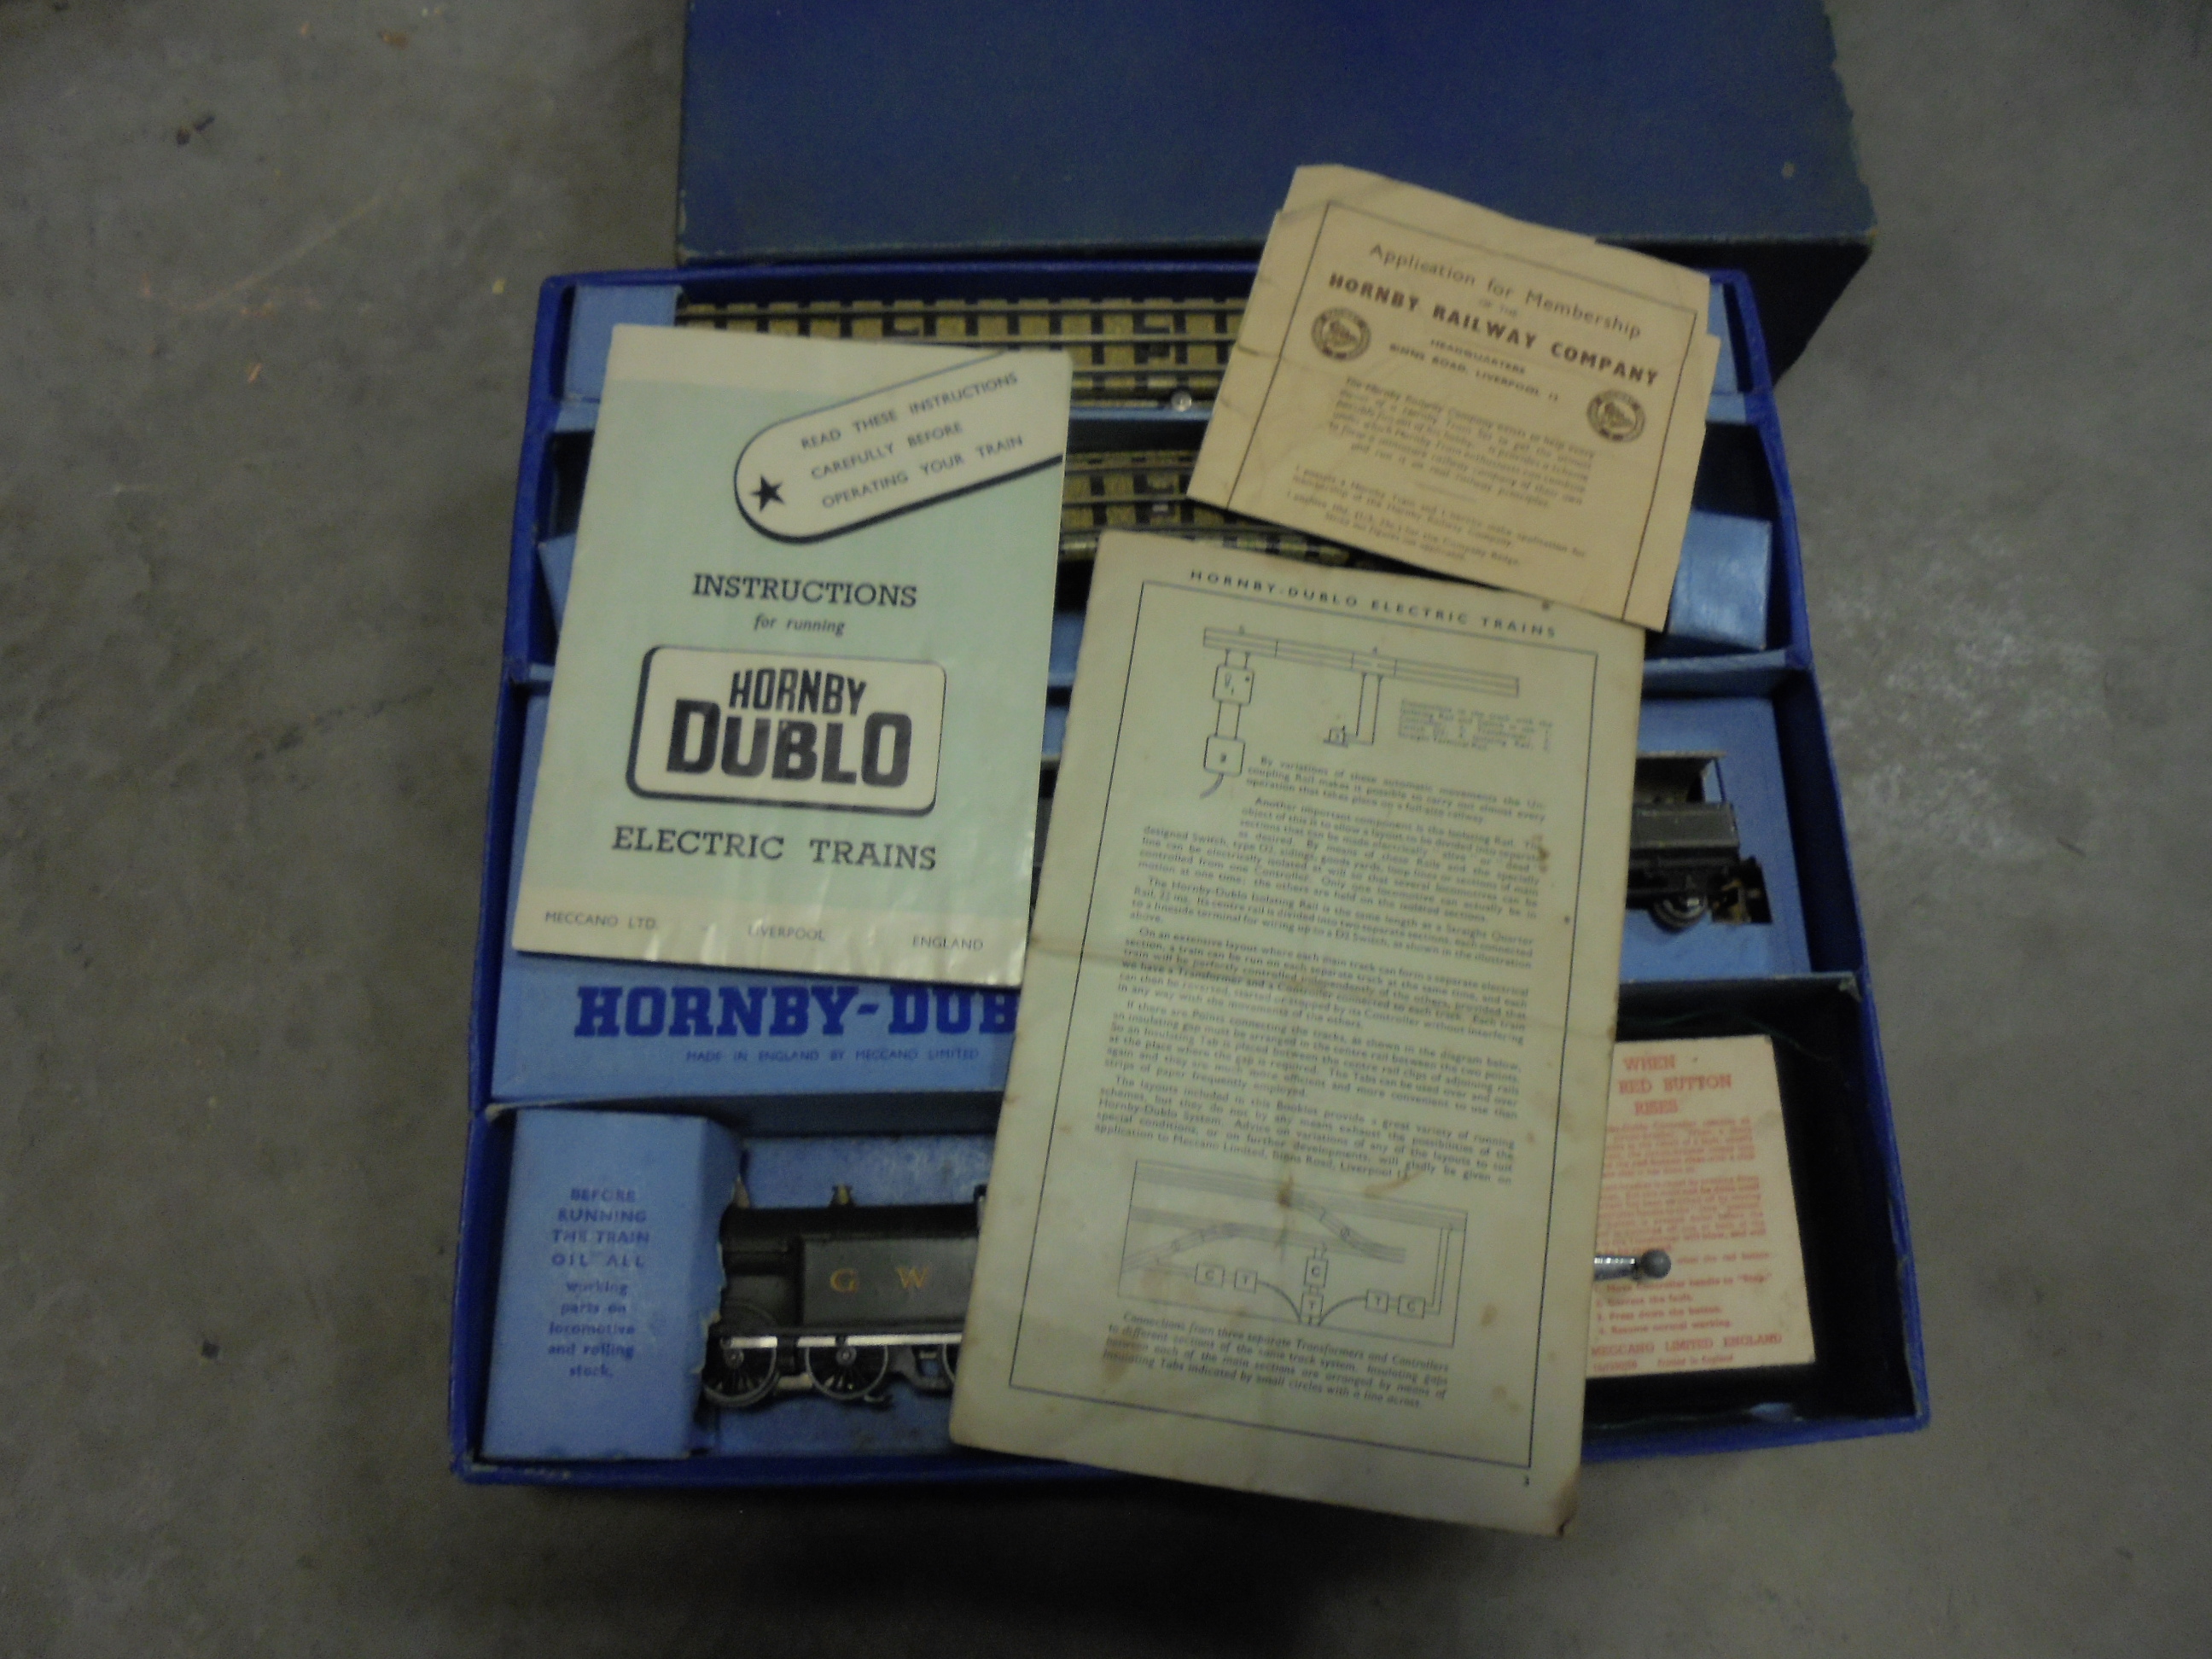 Boxed Hornby Dublo EDG7 Tank Goods Train set with GWR 0-6-2 locomotive, with paperwork, one loose - Image 2 of 3